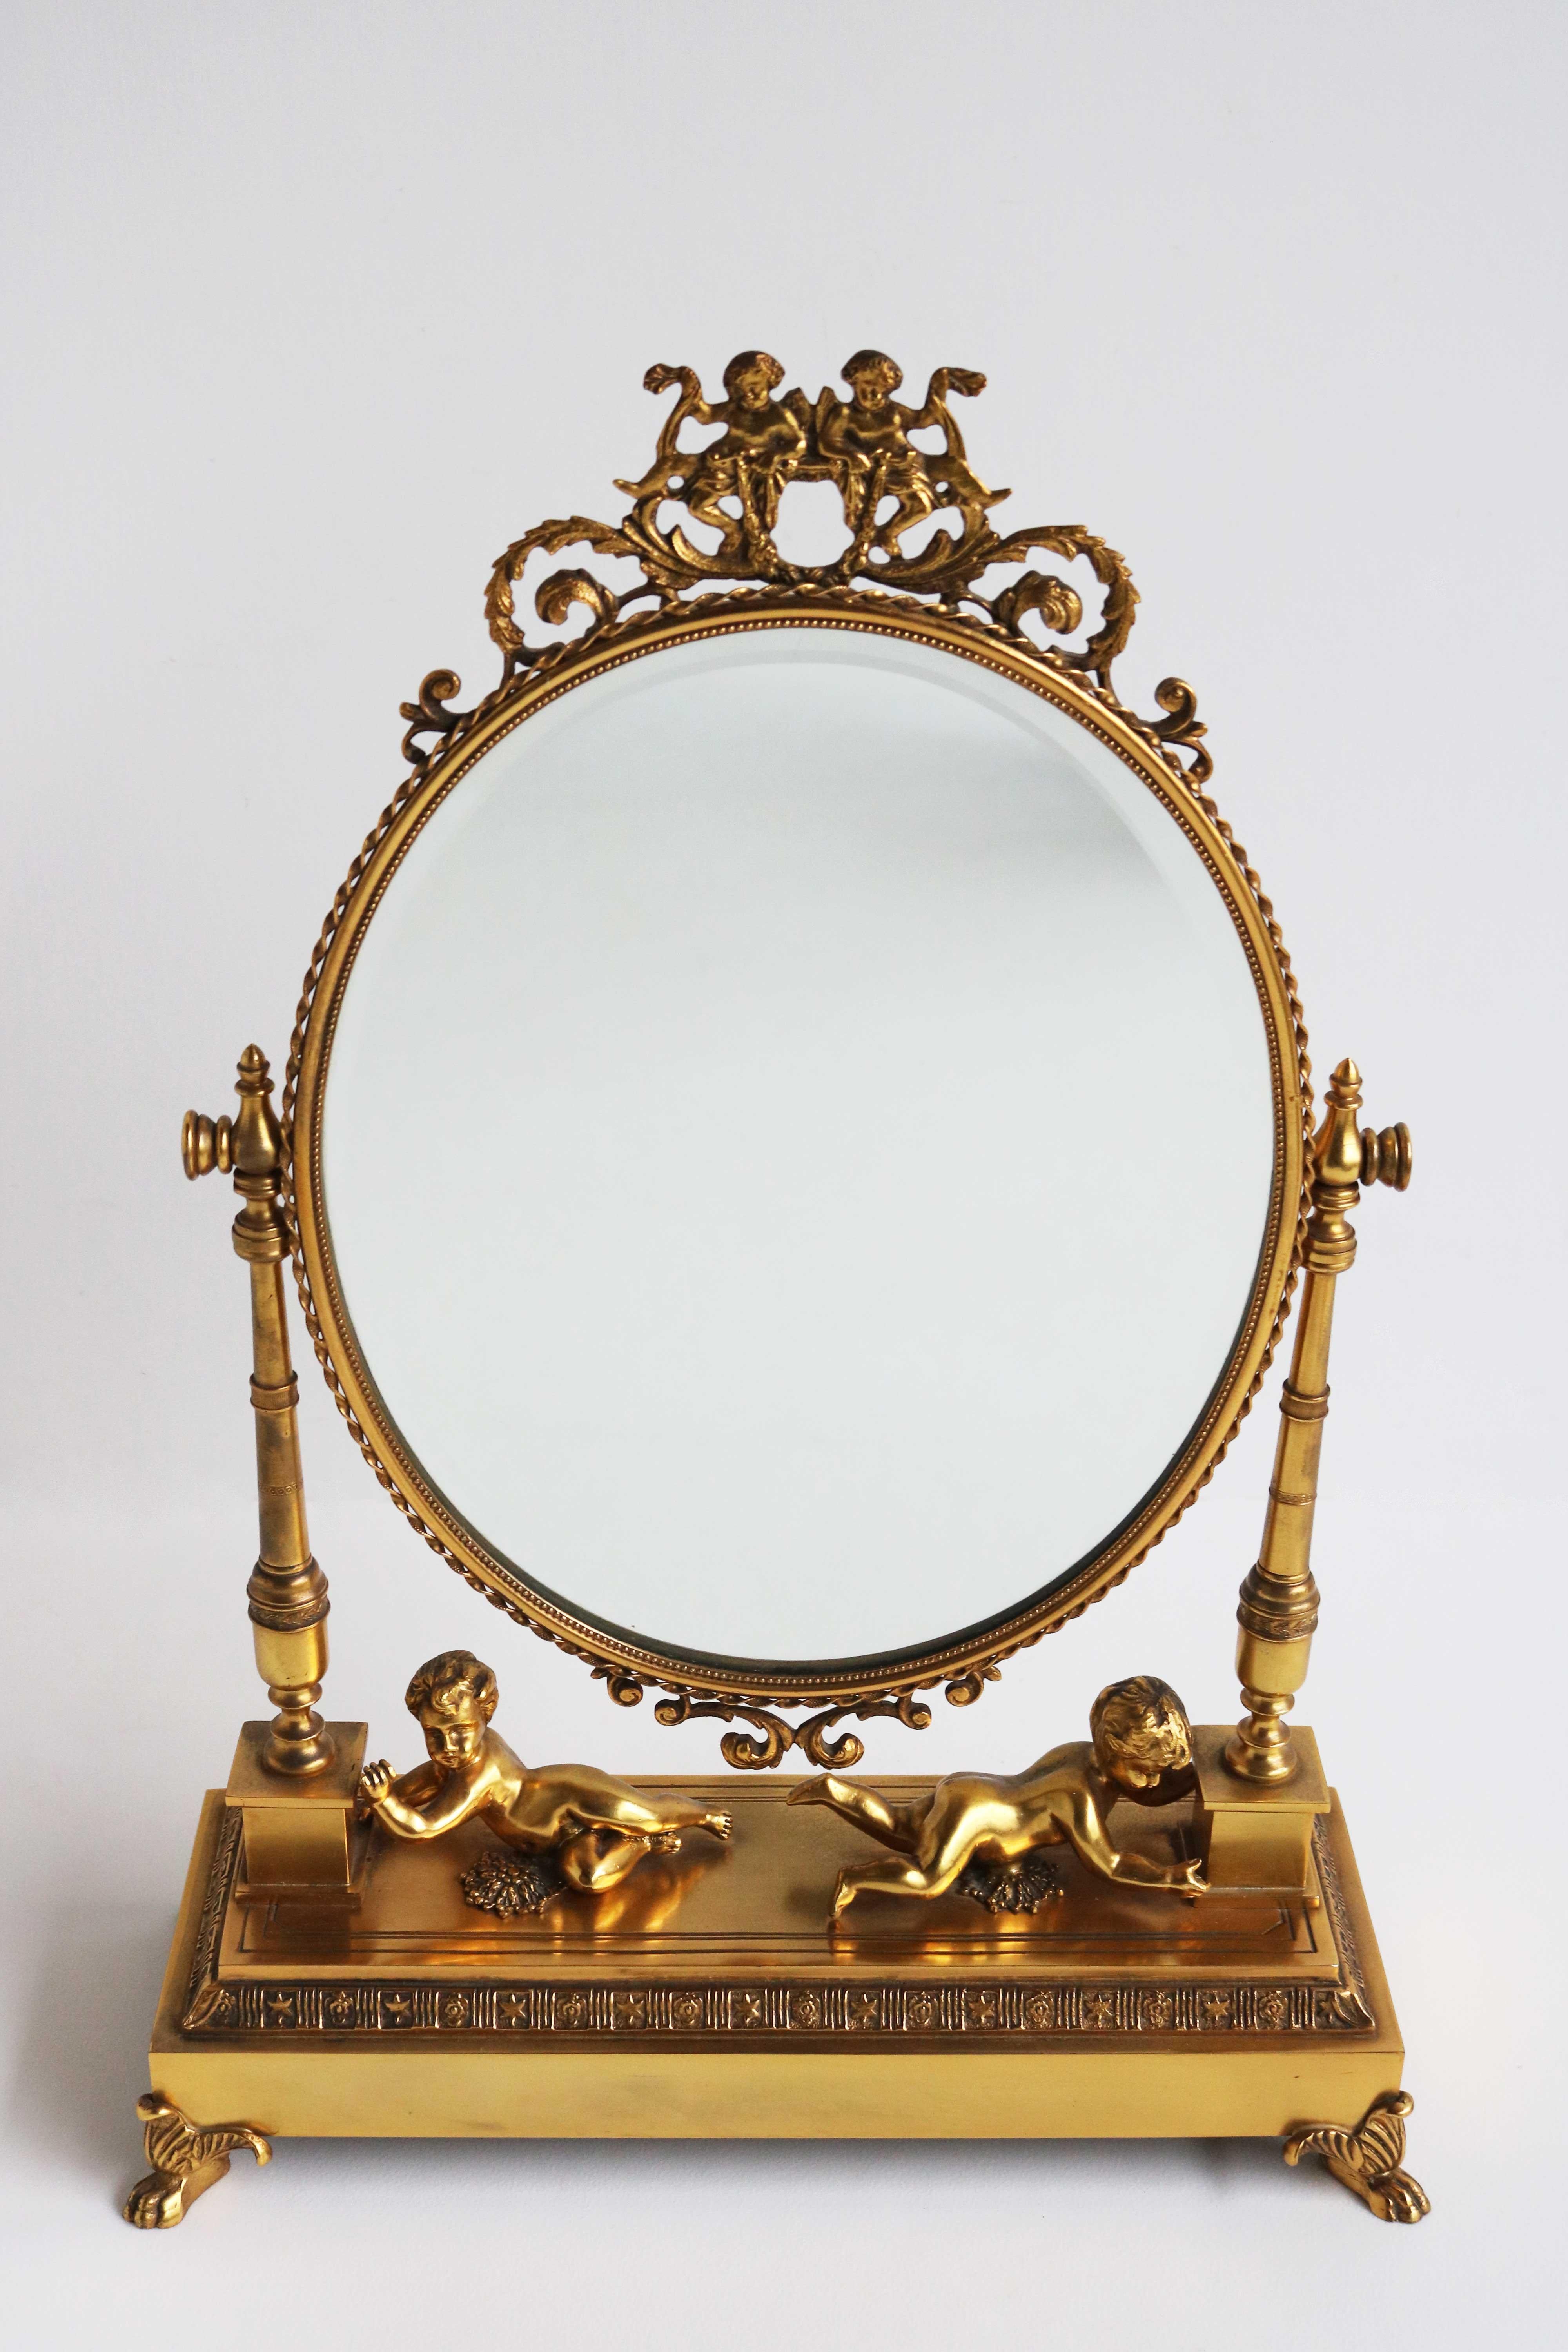 Beautiful antique French gilded bronze dressing mirror / vanity mirror / table mirror / tabletop mirror, with swiveling faceted oval mirror and cherubs, circa 1880-1900

A luxurious late 19th Century gilt bronze dressing table mirror, with lots of